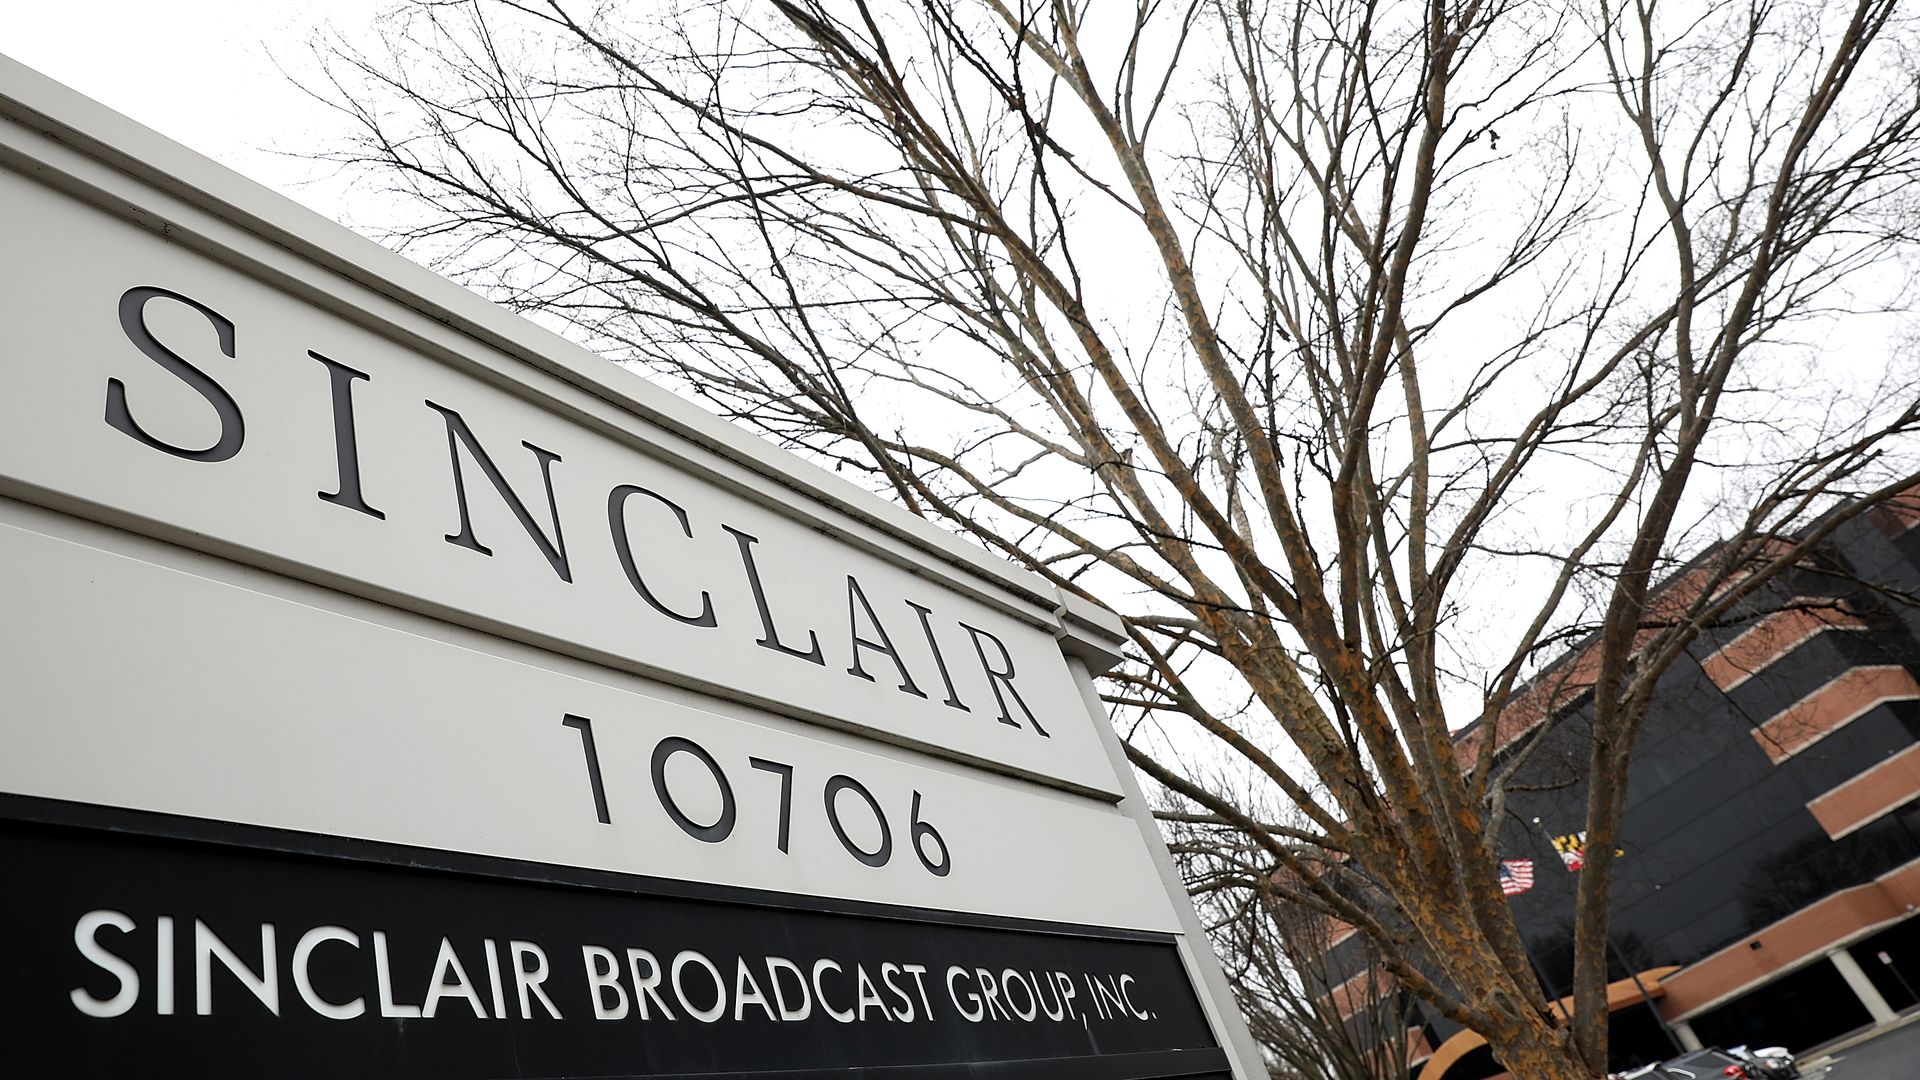 Sinclair broadcasting group sign. 